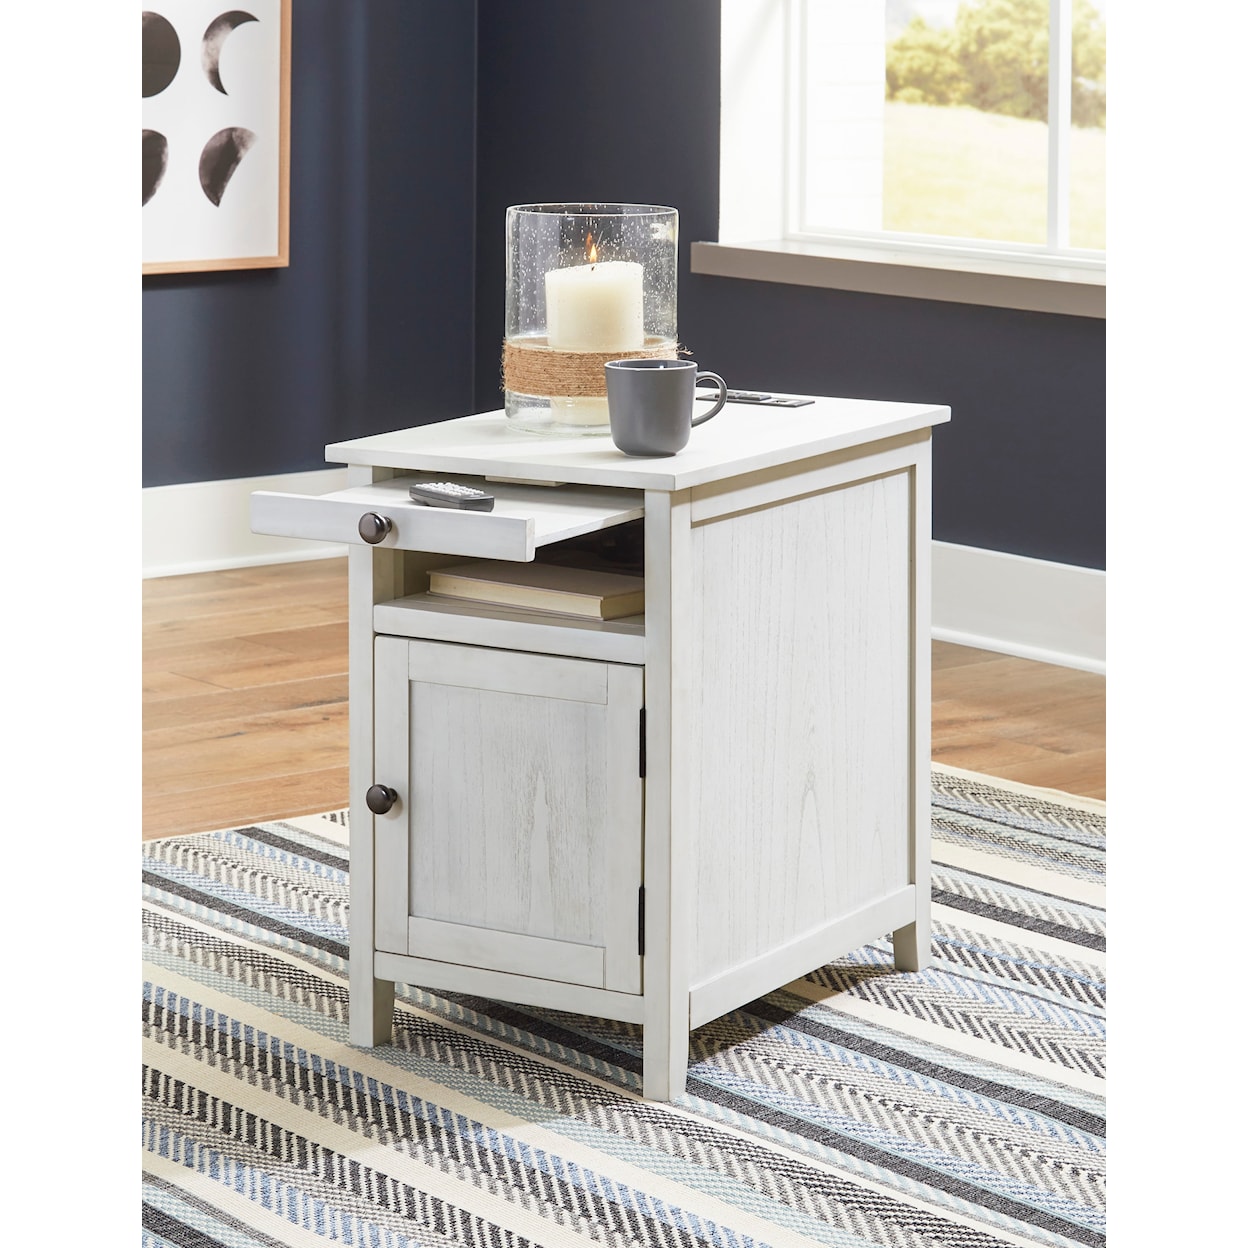 Ashley Signature Design Treytown Chairside End Table